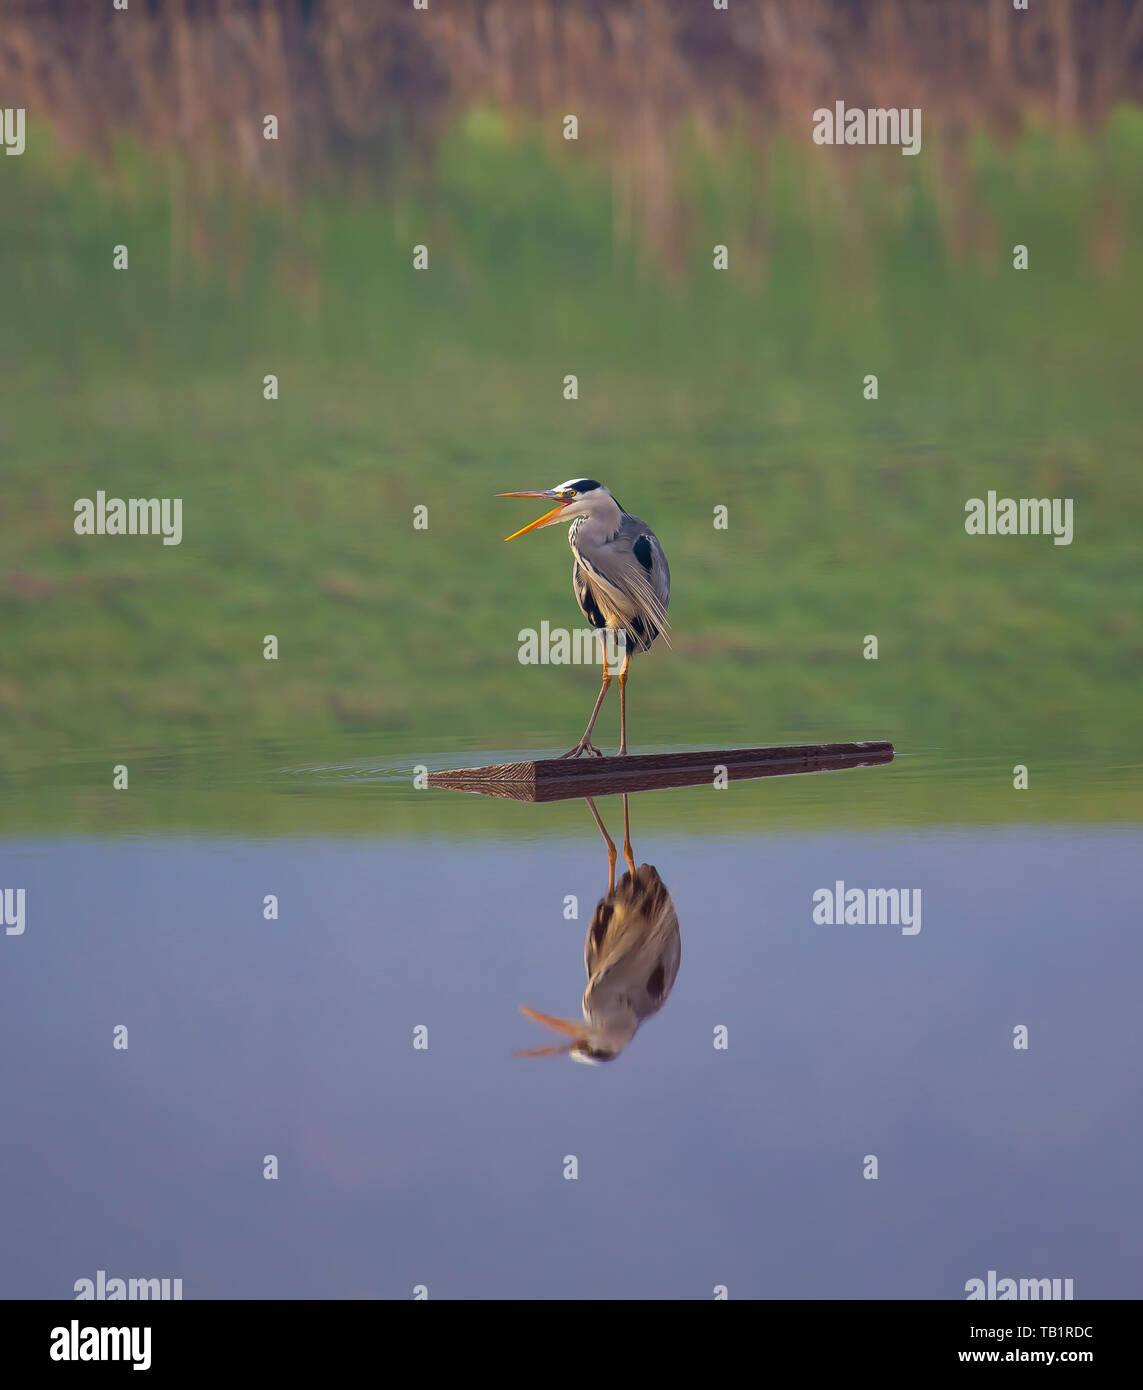 Isolated, wild British grey heron bird (Ardea cinerea) standing on wooden perch in middle of UK lake squawking, beak open. Perfect reflection in water. Stock Photo